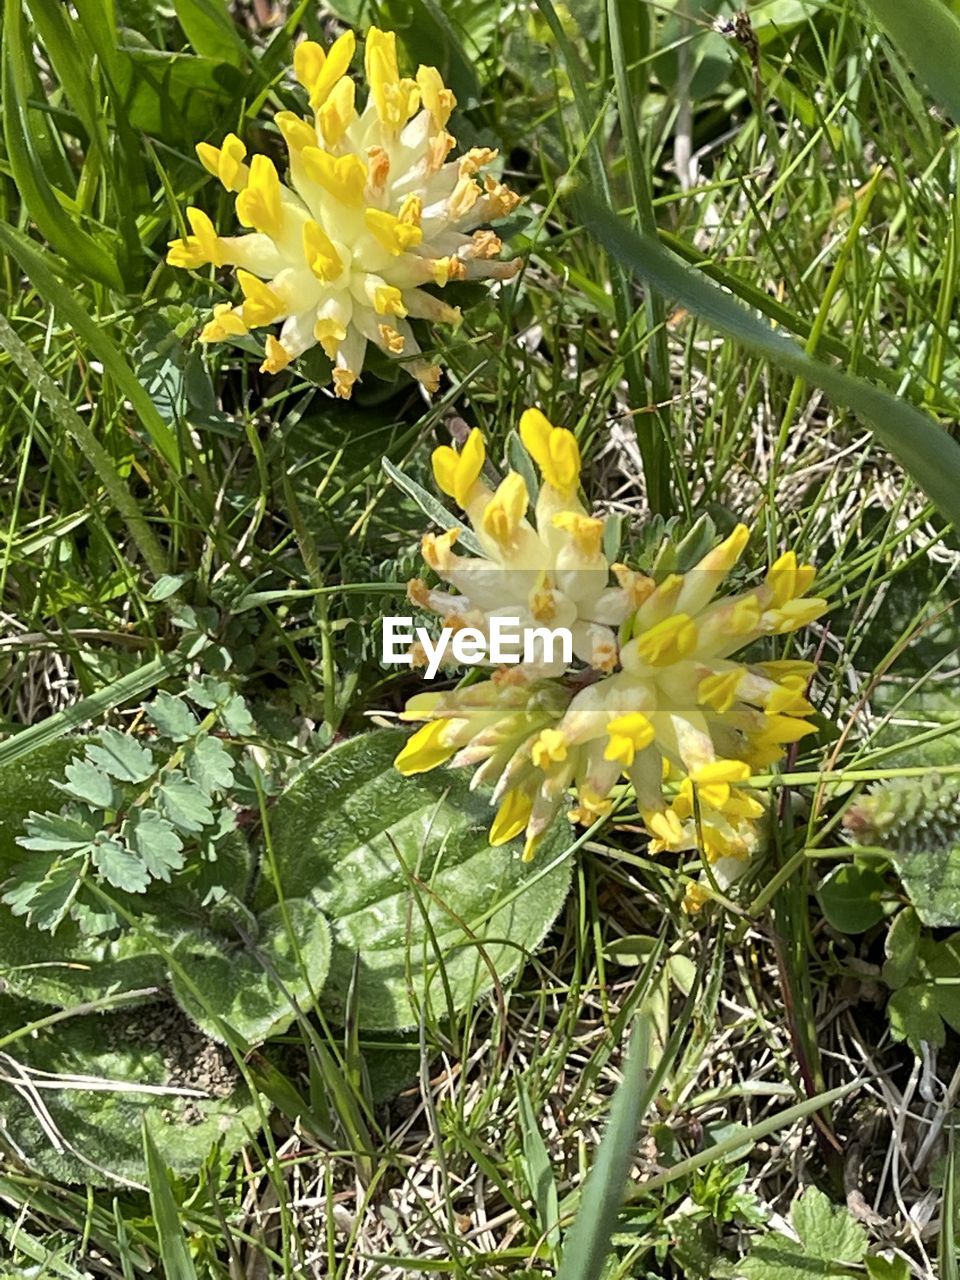 plant, growth, flowering plant, flower, beauty in nature, freshness, fragility, yellow, green, nature, close-up, flower head, petal, inflorescence, leaf, plant part, no people, high angle view, day, wildflower, outdoors, field, land, grass, botany